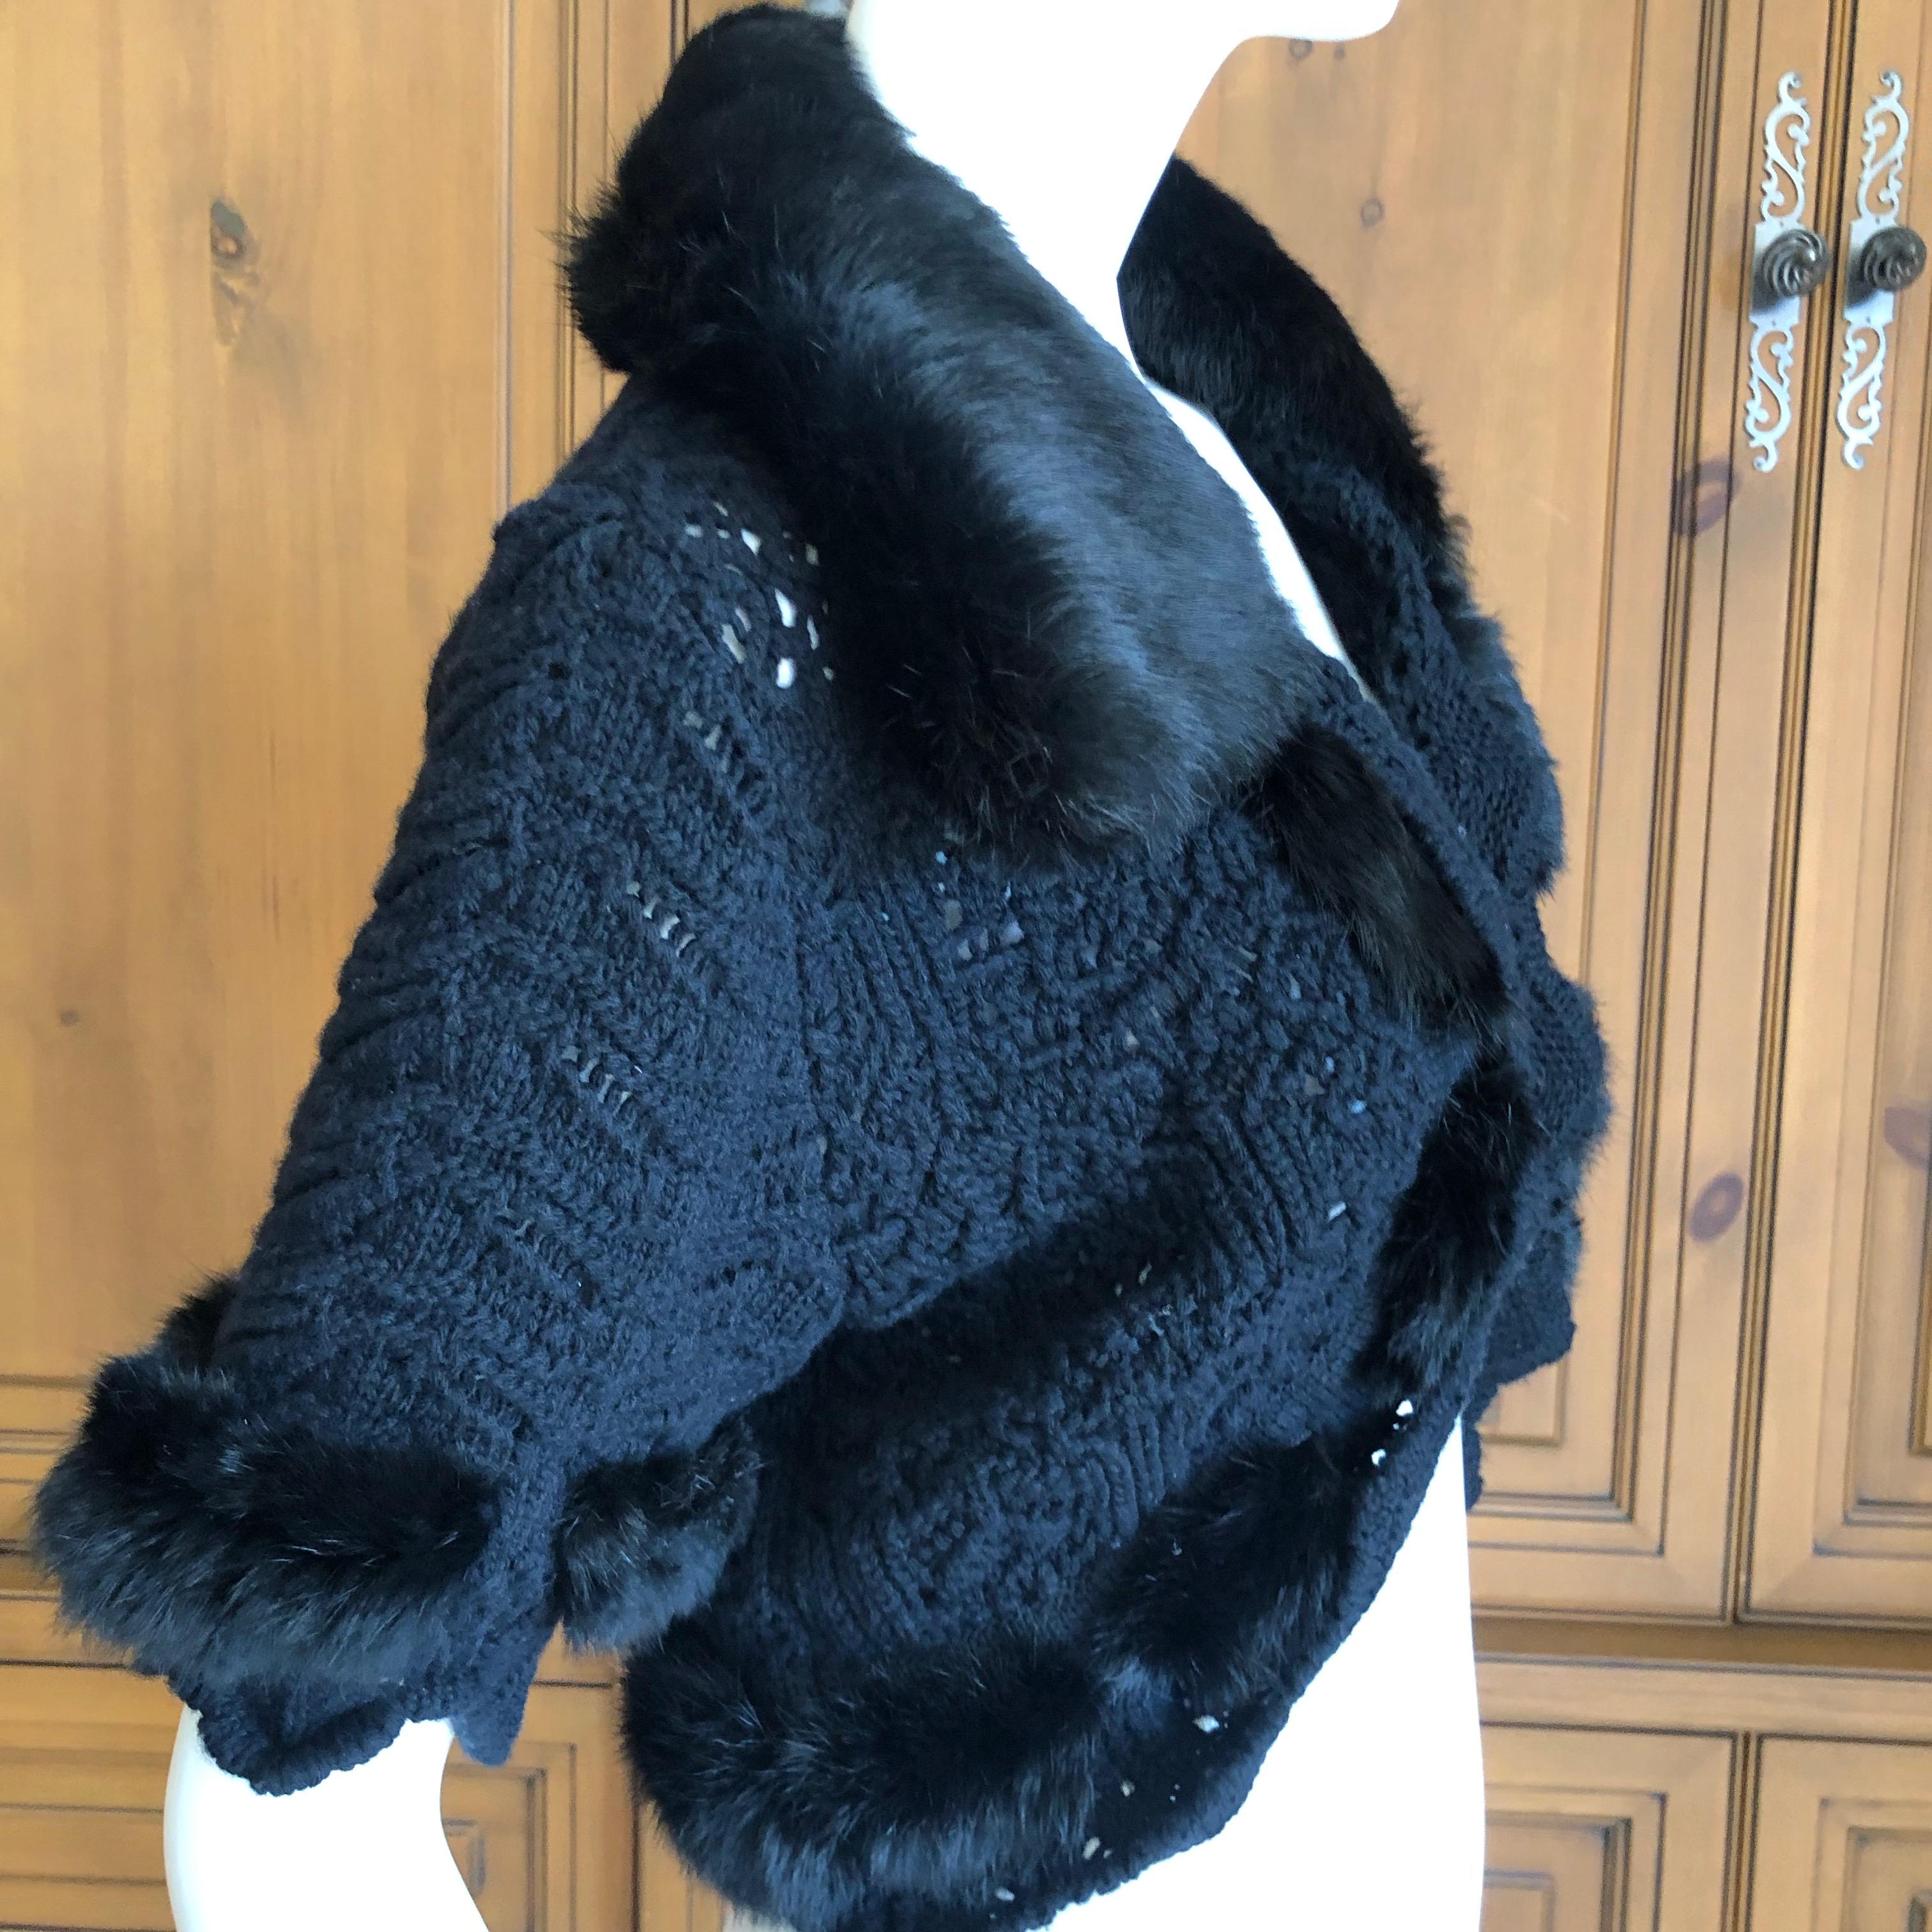  Christian Dior by John Galliano Fur Trimmed Open Weave Knit Black Sweater  For Sale 3